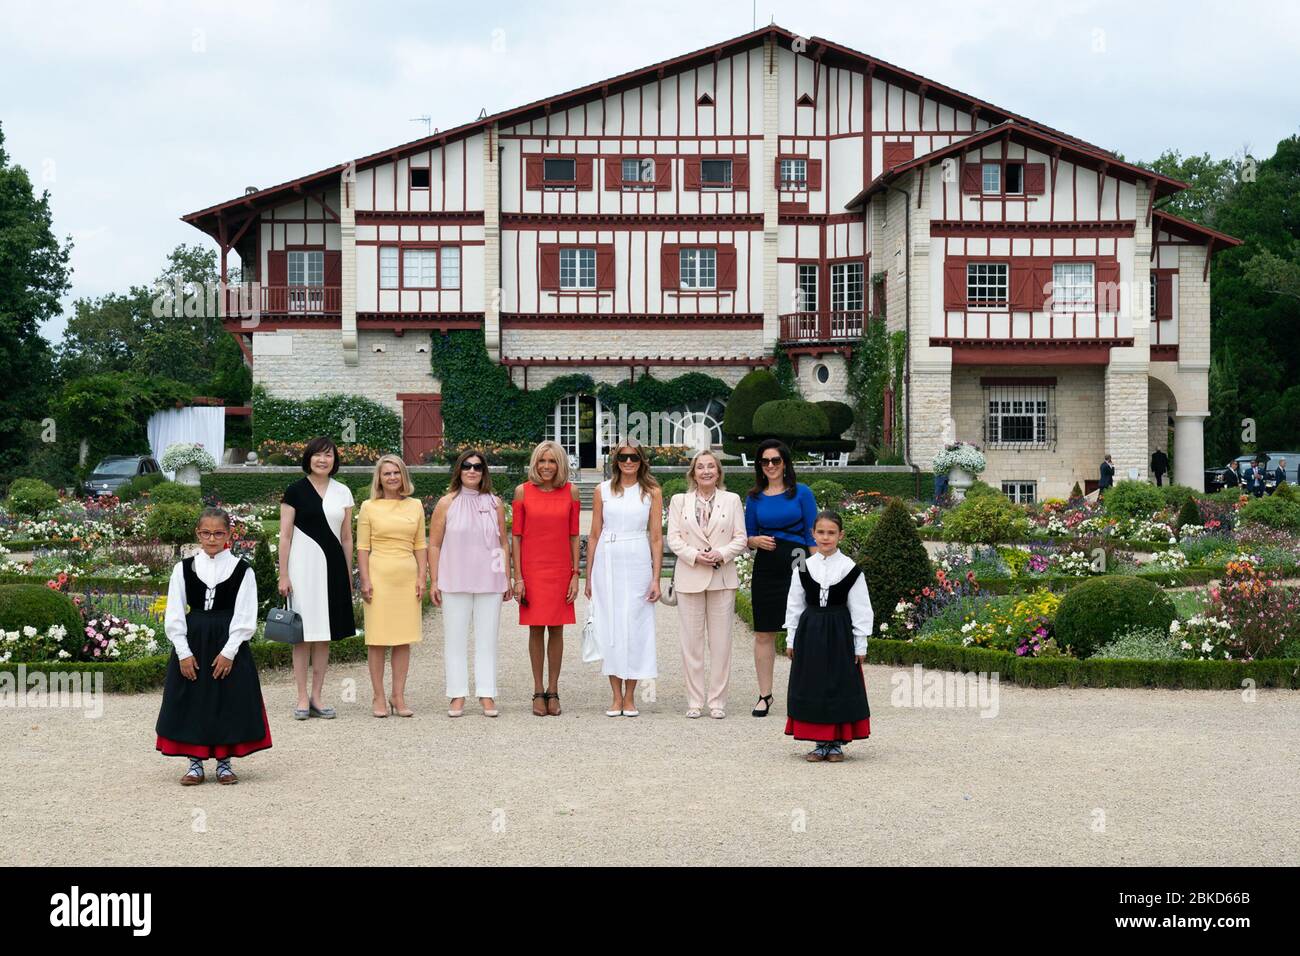 First Lady Melania Trump takes a family photo with the spouses of G7 leaders during a tour of Villa Arnaga Sunday, Aug. 25, 2019, in Cambo-les-Bains, France. From left, 10 year-old Enea Amorena; Mrs. Akie Abe, wife of Prime Minister of Japan Shinzo Abe; Mrs. Malgorzata Tusk, wife of European Council President Donald Tusk; Mrs. Jenny Morrison, wife of Prime Minister of Australia Scott Morrison; Mrs. Brigitte Macron, wife of President Emmanuel Macron of France; Mrs. Maria Cecilia Morel Montes, wife of President Sebastian Pinera of Chile; Mrs. Adele Malpass, wife of President of World Bank David Stock Photo